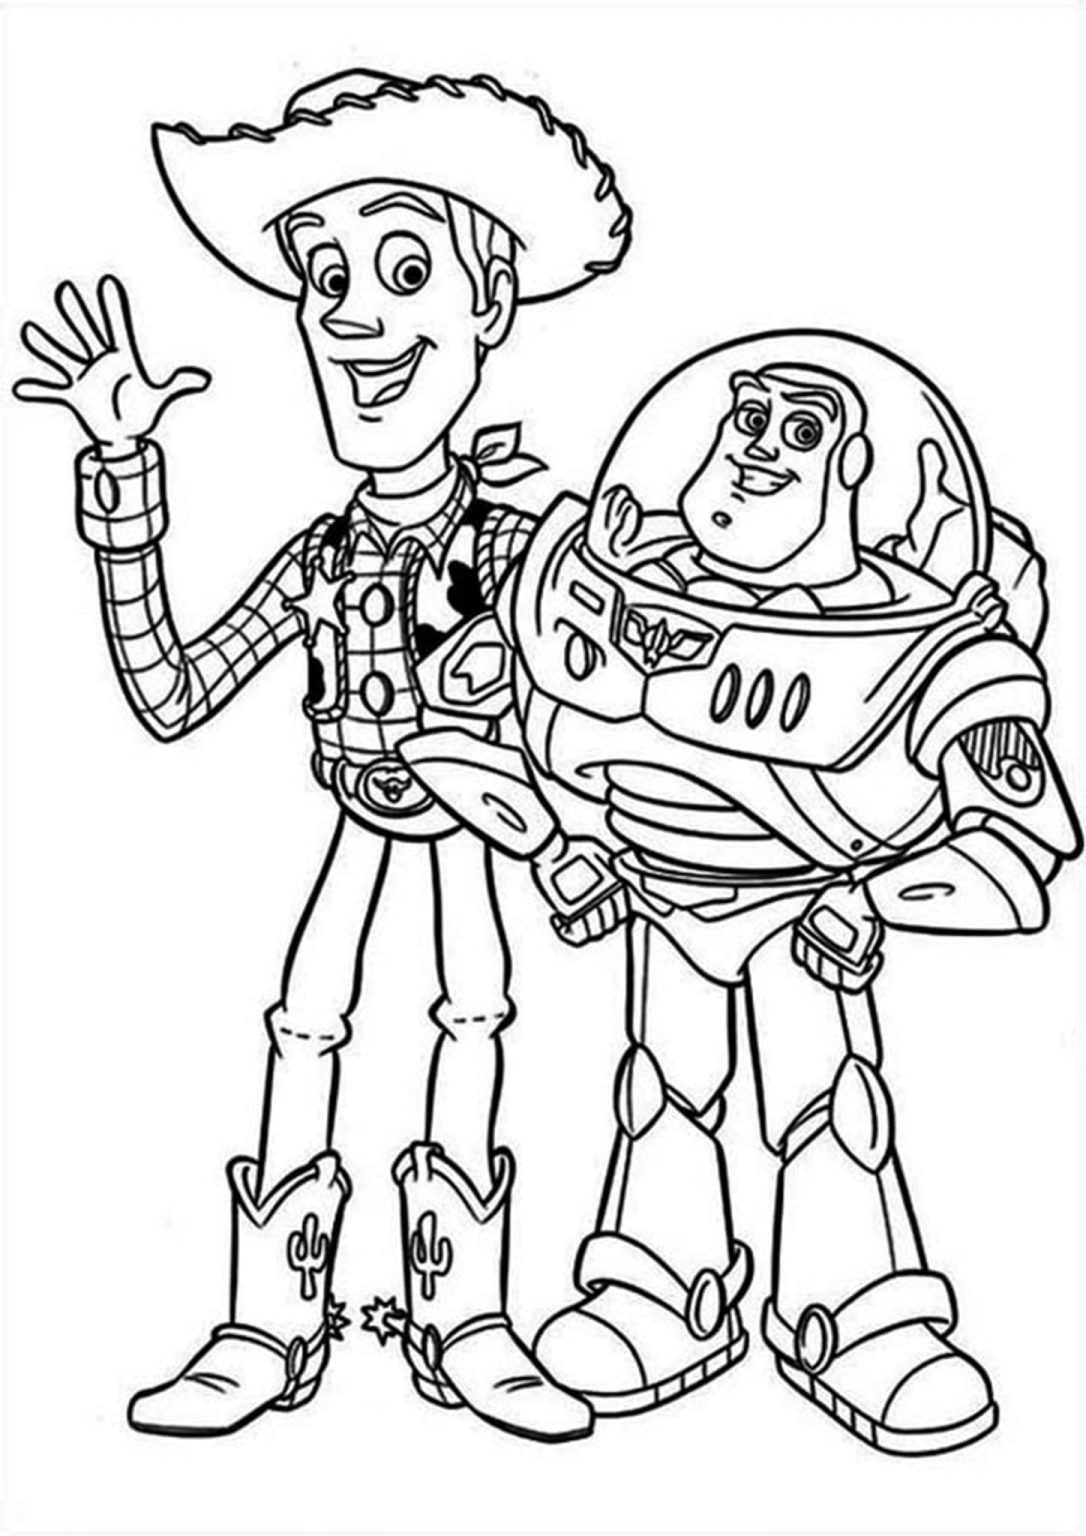 free printable disney toy story coloring pages coloring home - toy story printable coloring pages | printable coloring pages toy story